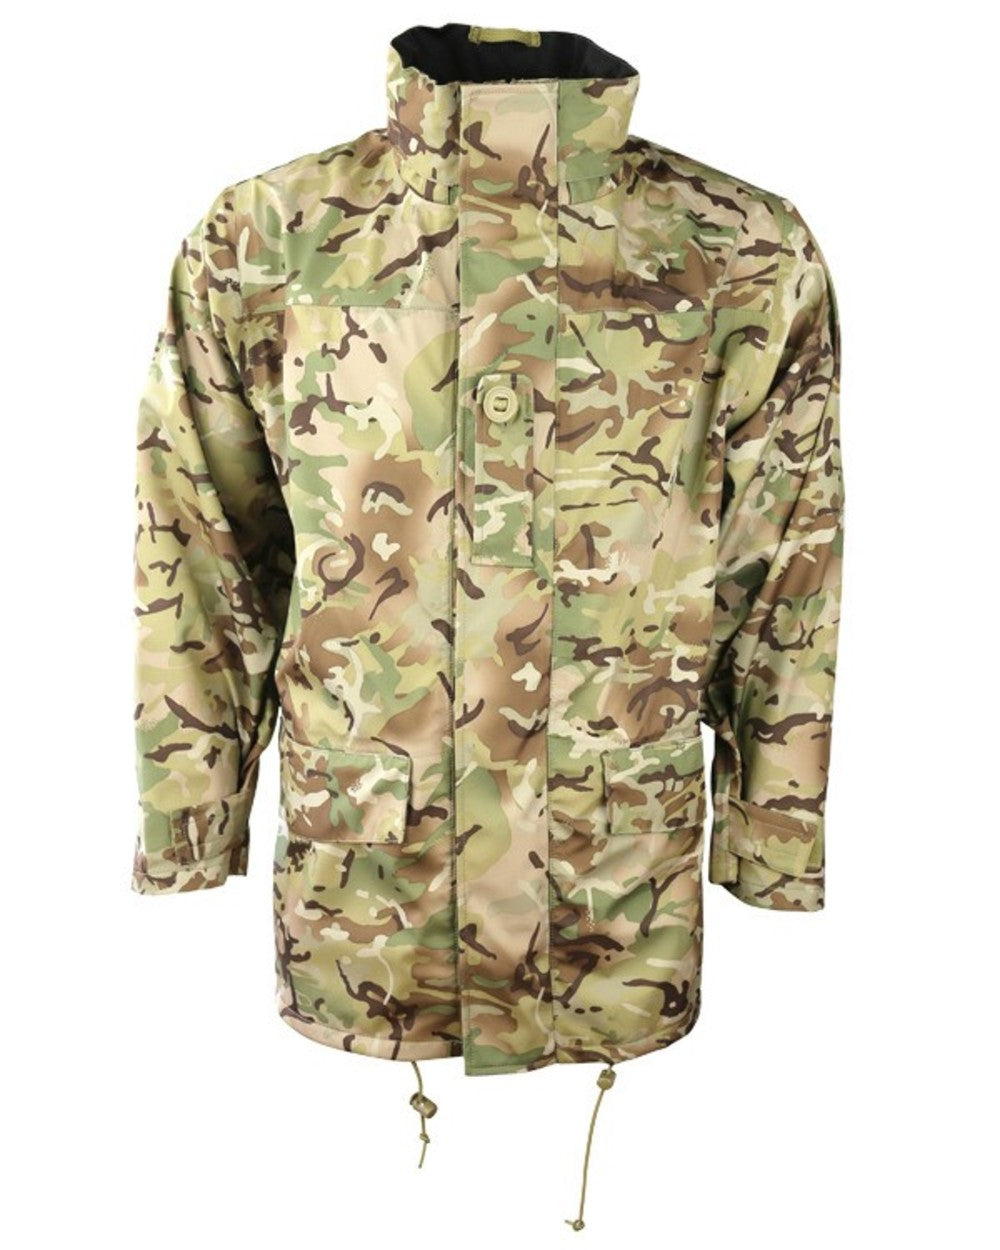 Camouflage Waterproof Jackets | Army Goretex Jackets | Military ...